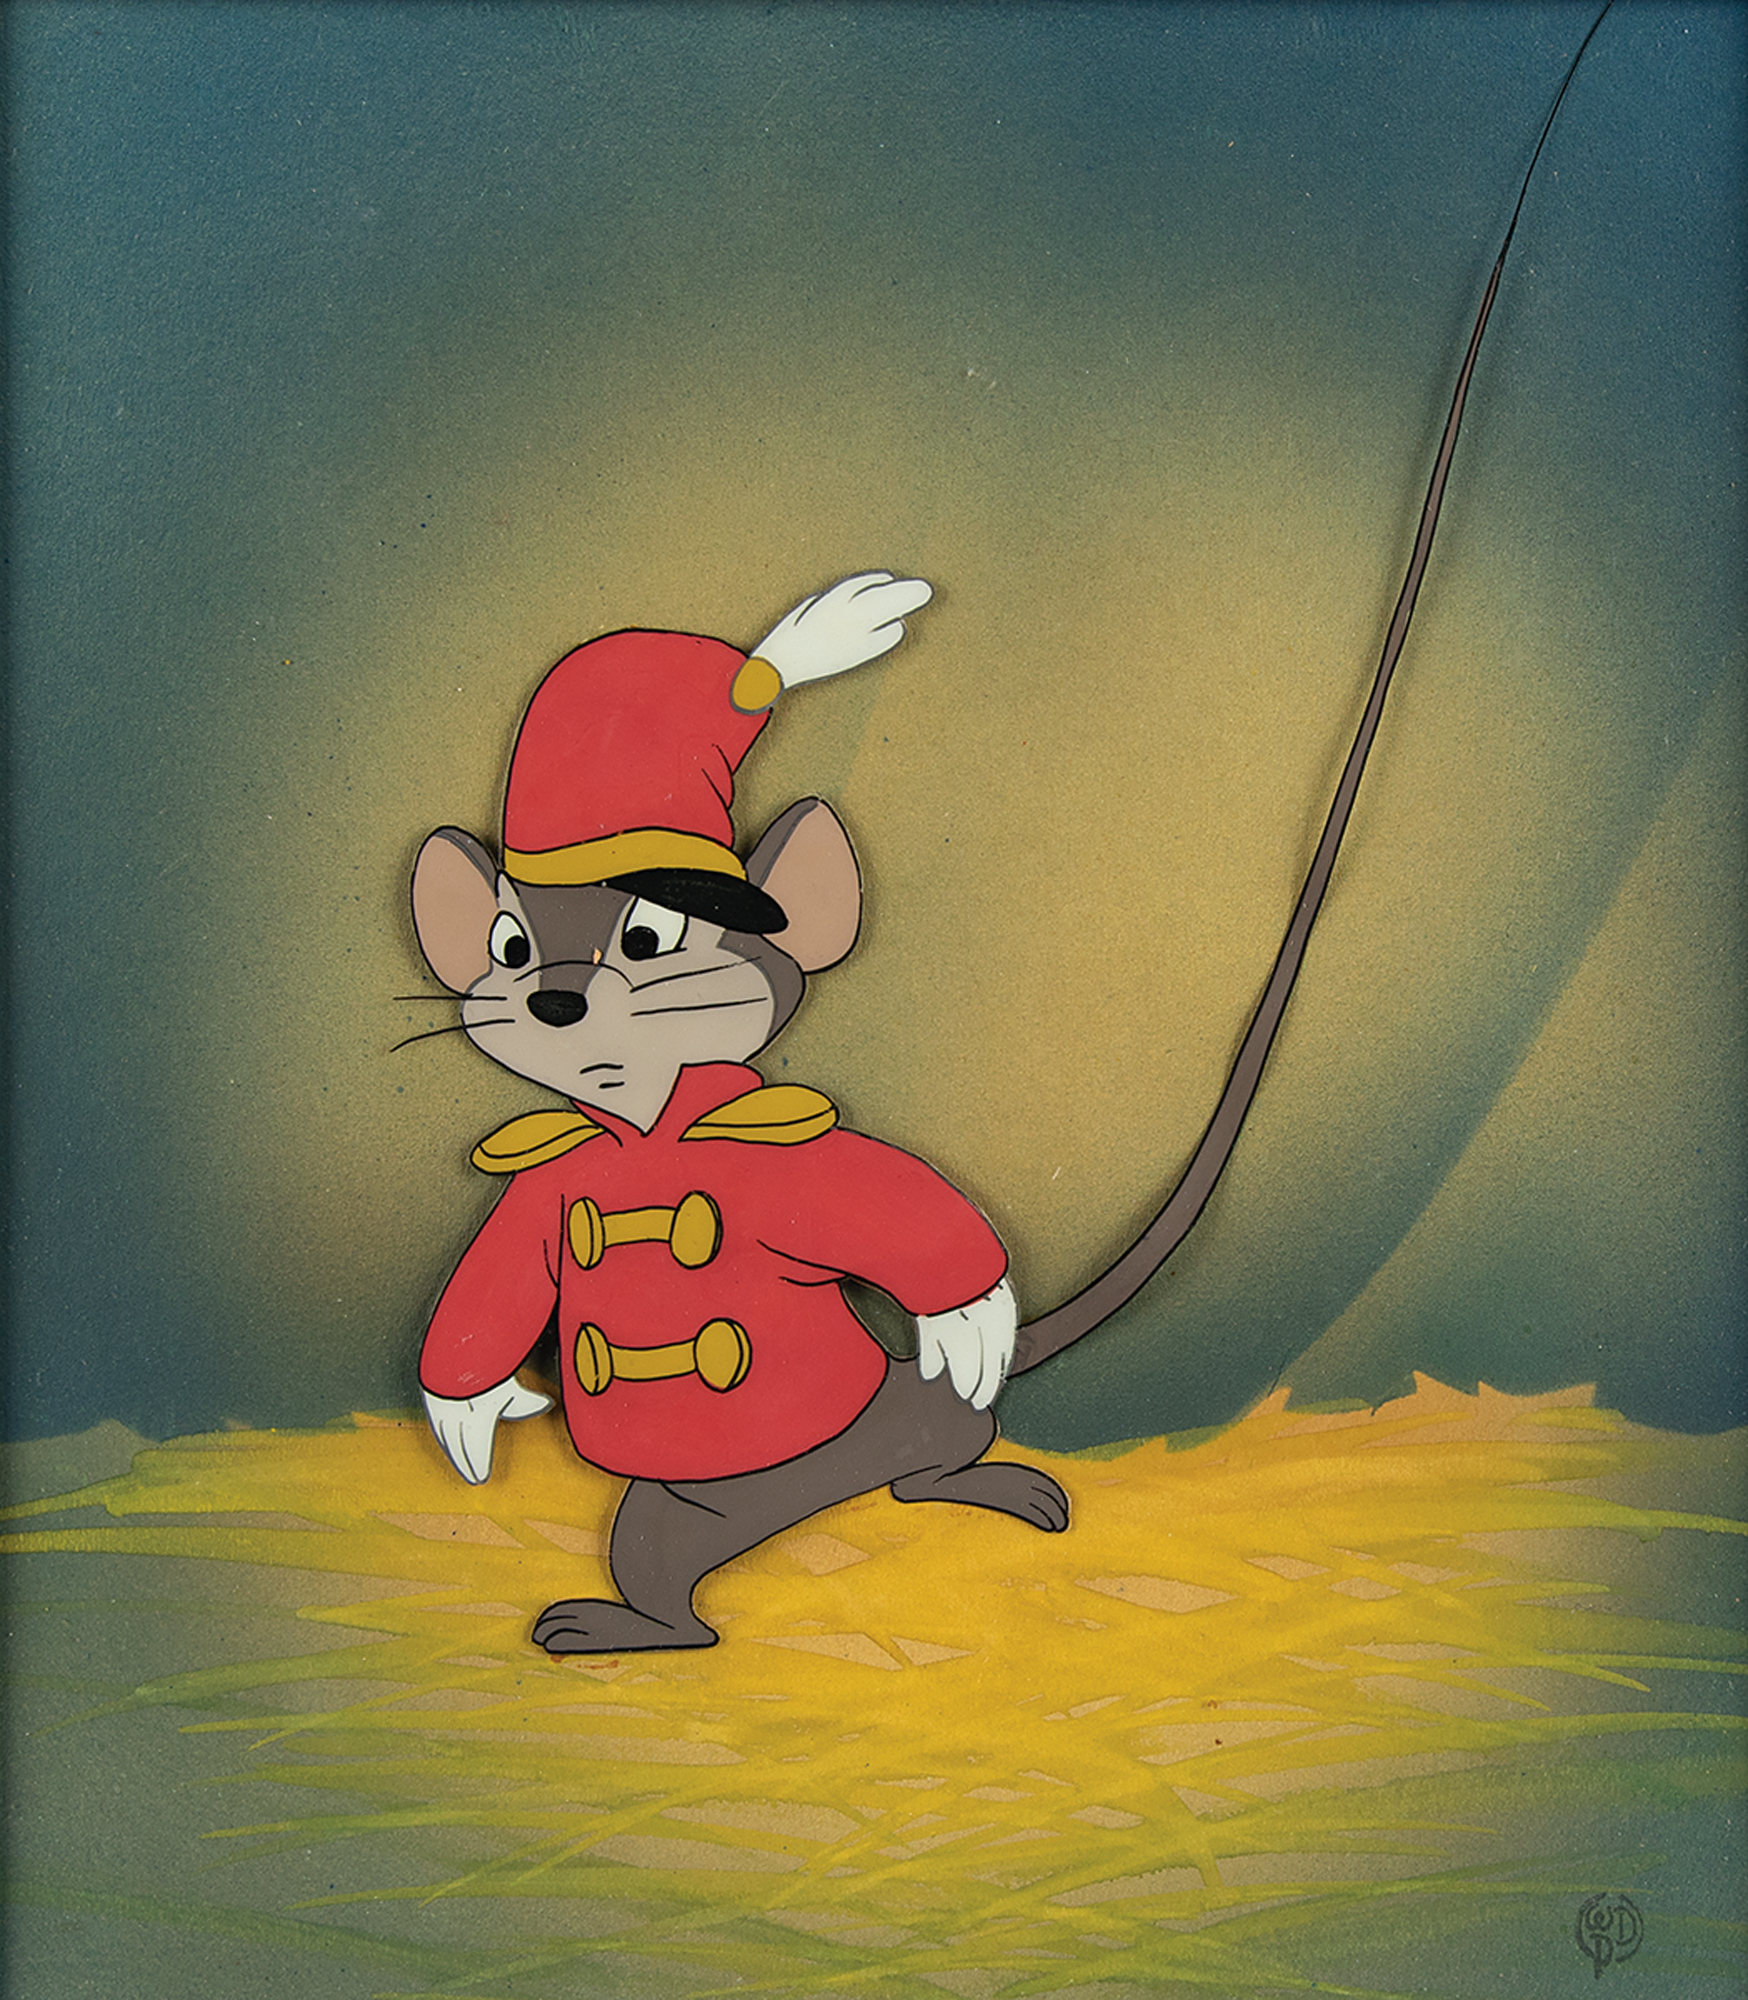 Lot #721 Timothy Q. Mouse production cel from Dumbo